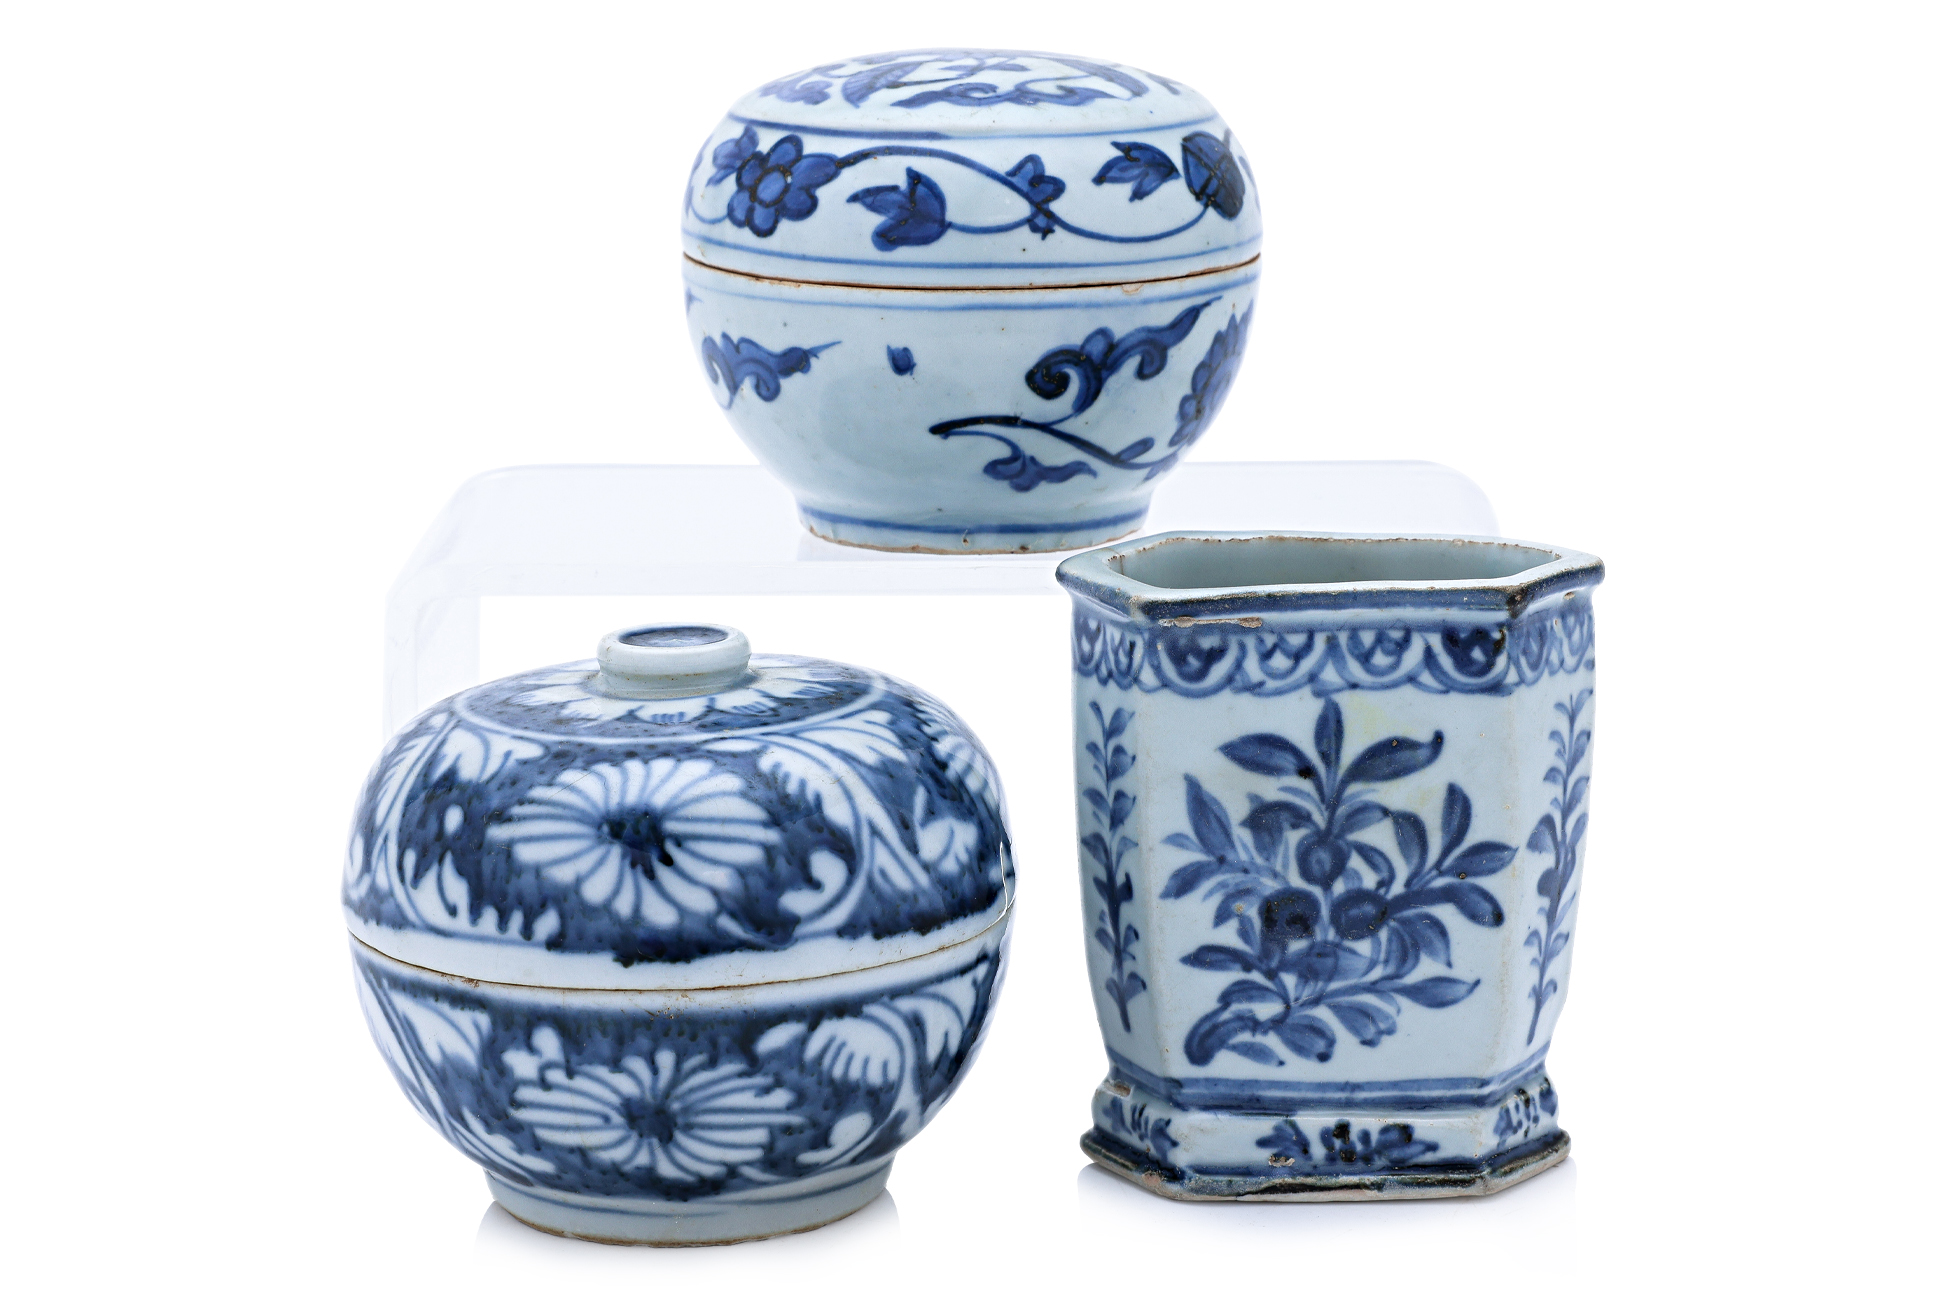 TWO BLUE AND WHITE PORCELAIN BOXES AND A JAR